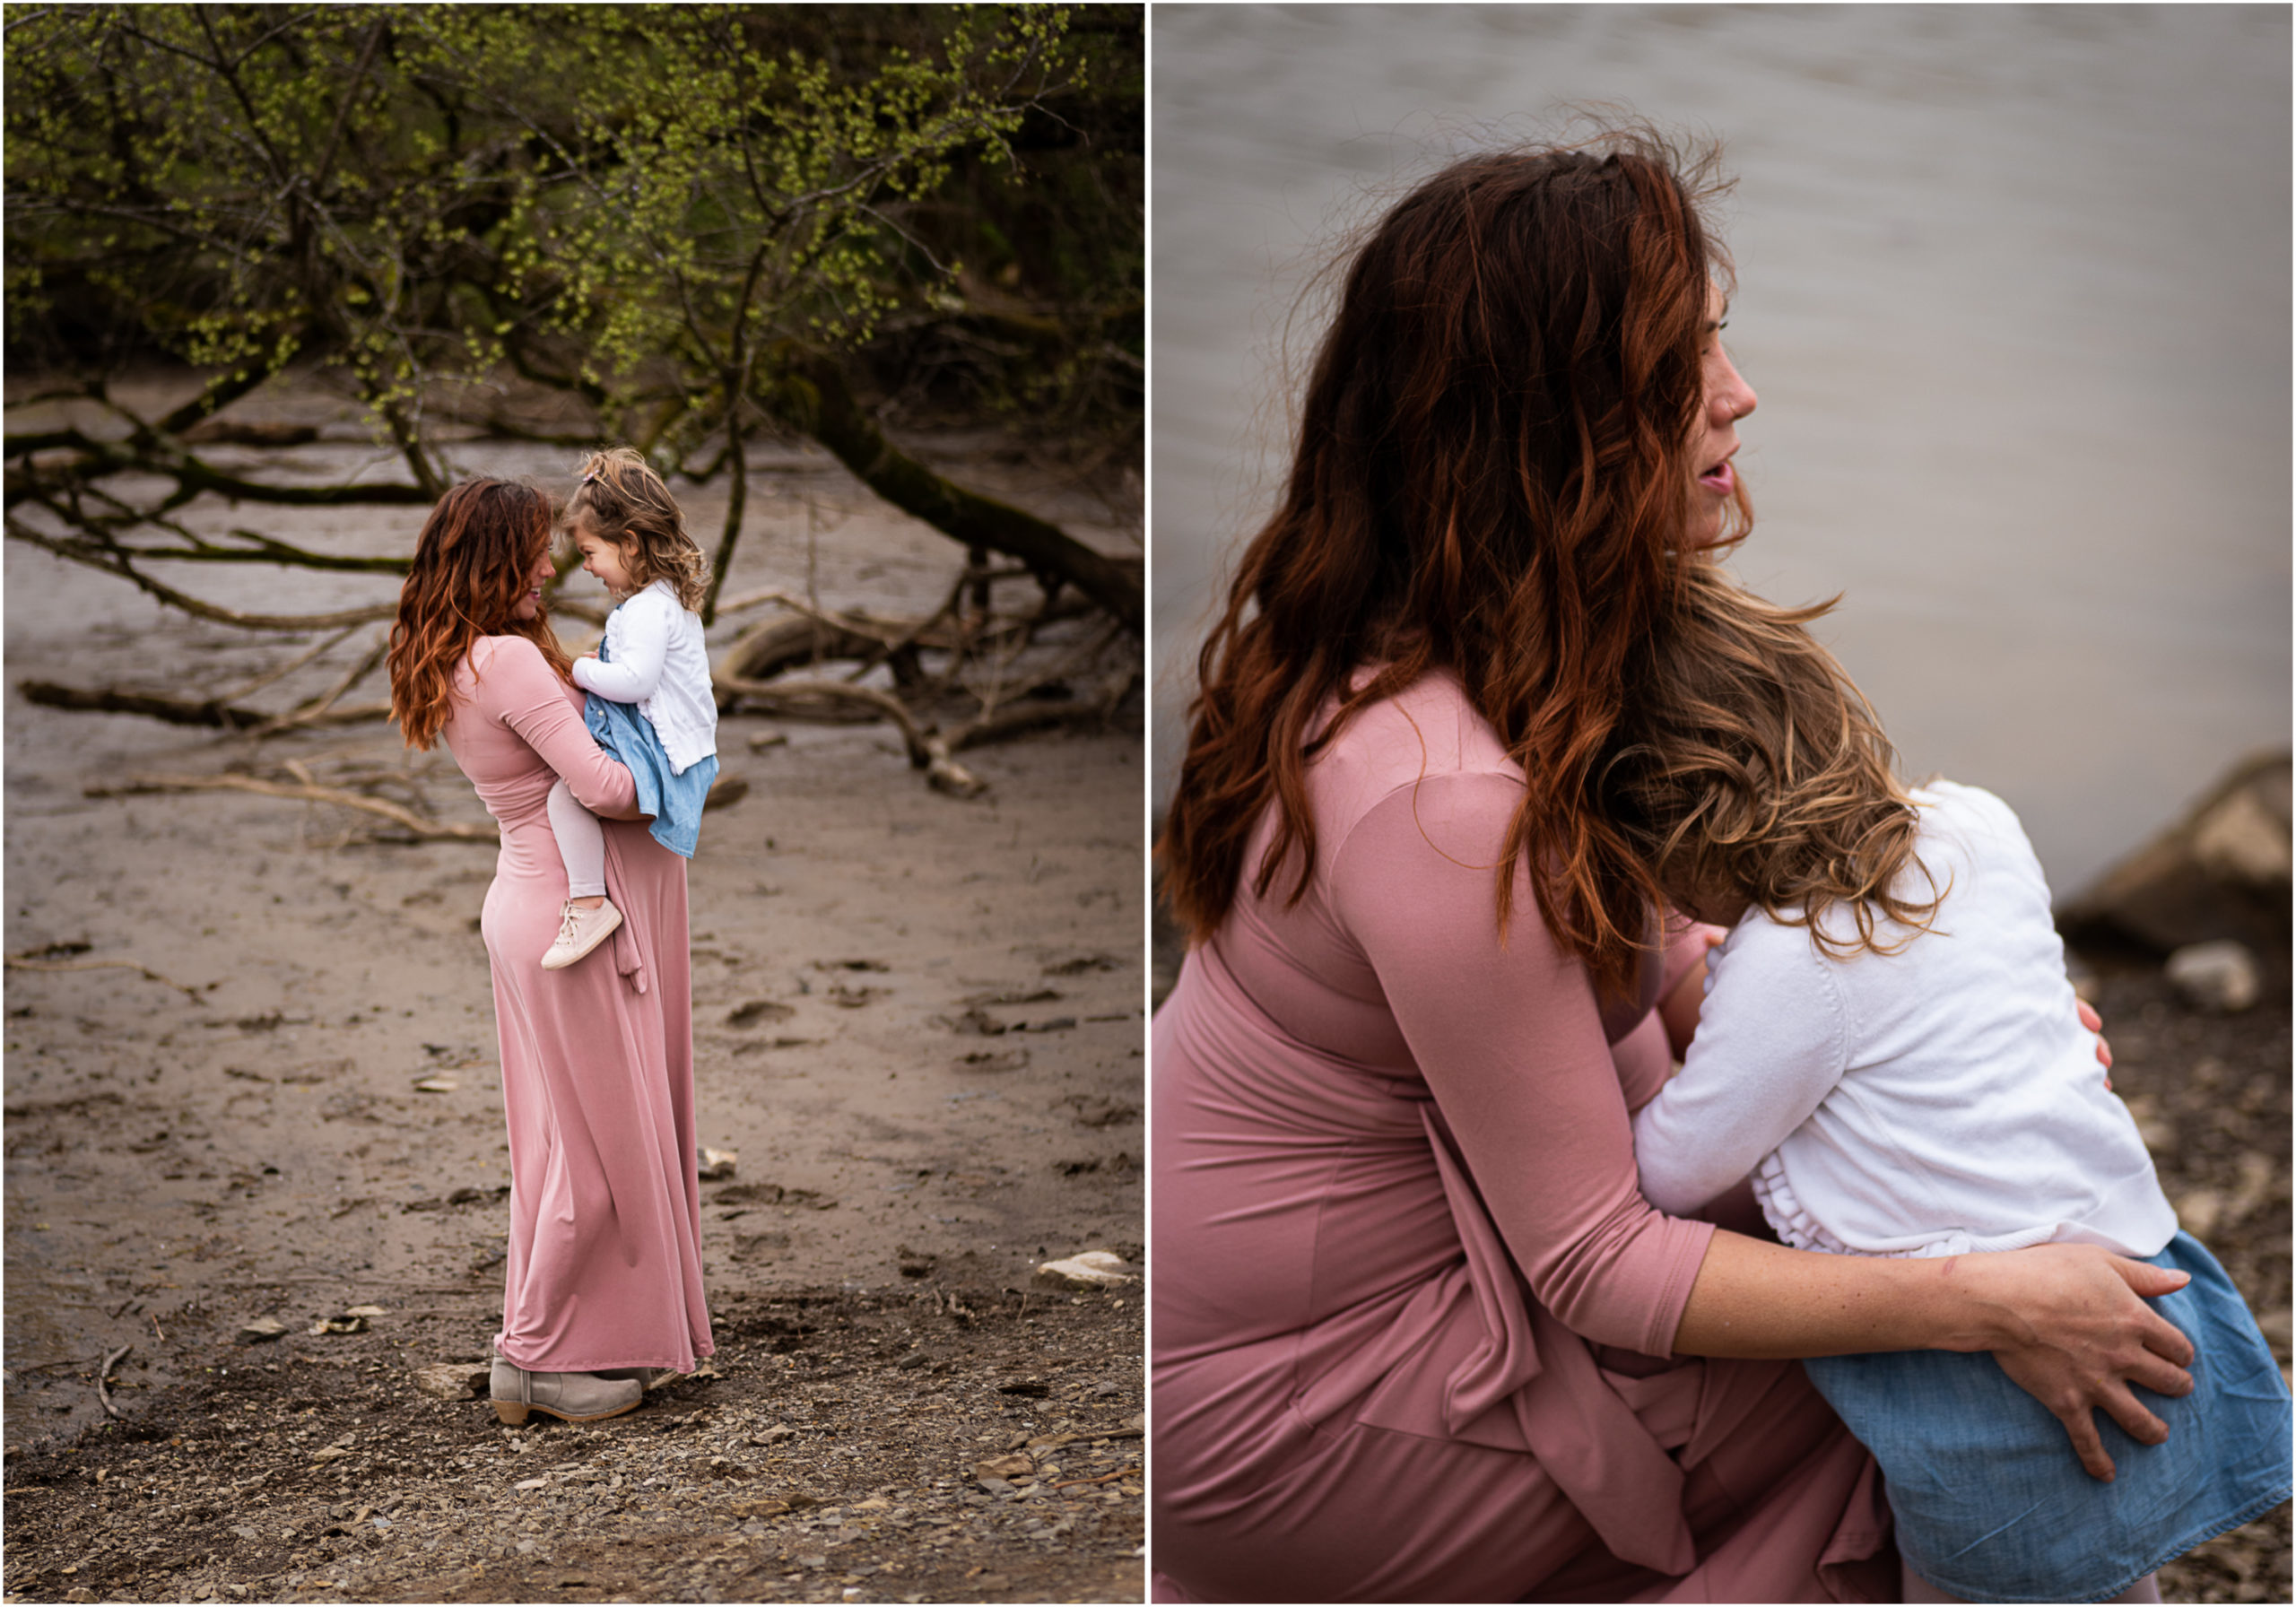 Maternity photos with a woman and her family along the Tennessee River shoreline.